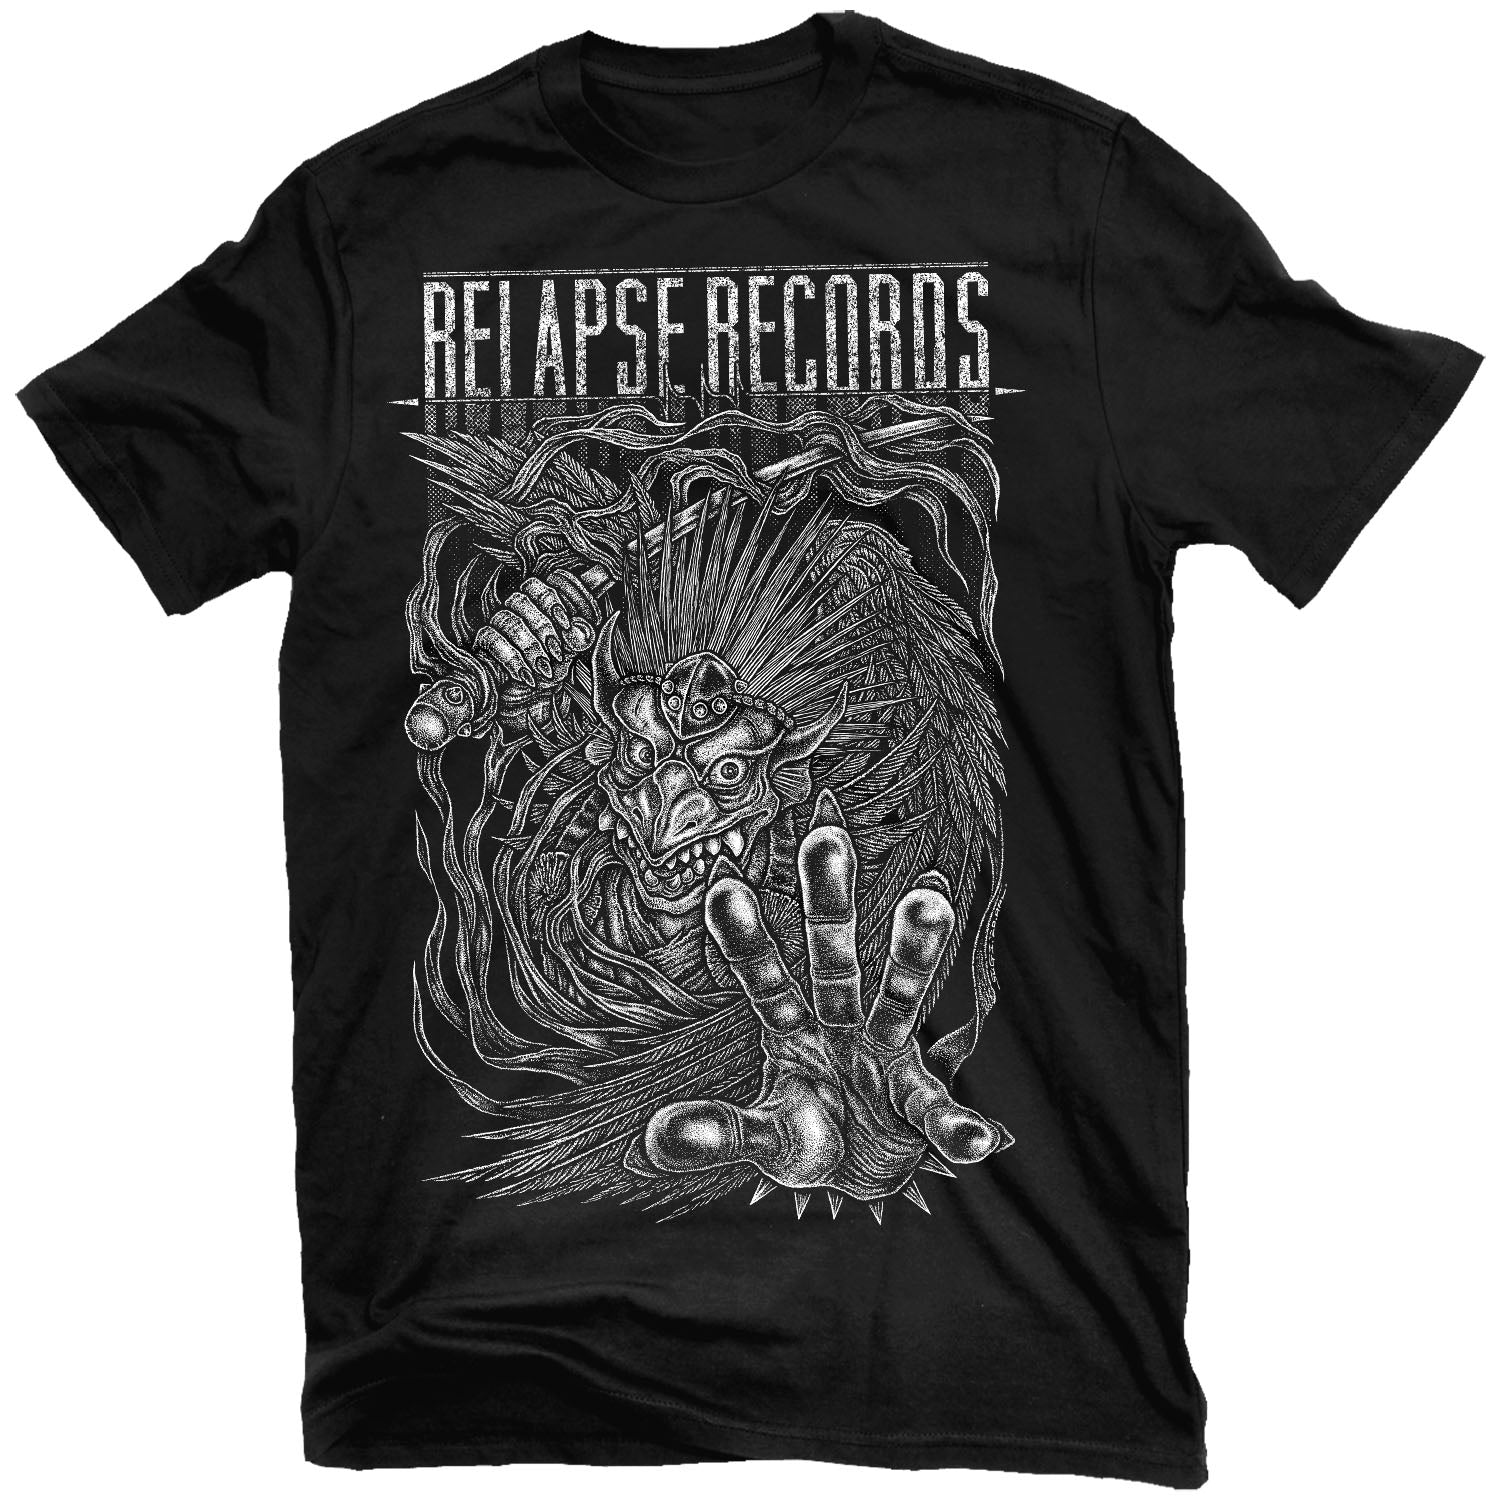 Relapse Records "Sugi" T-Shirt